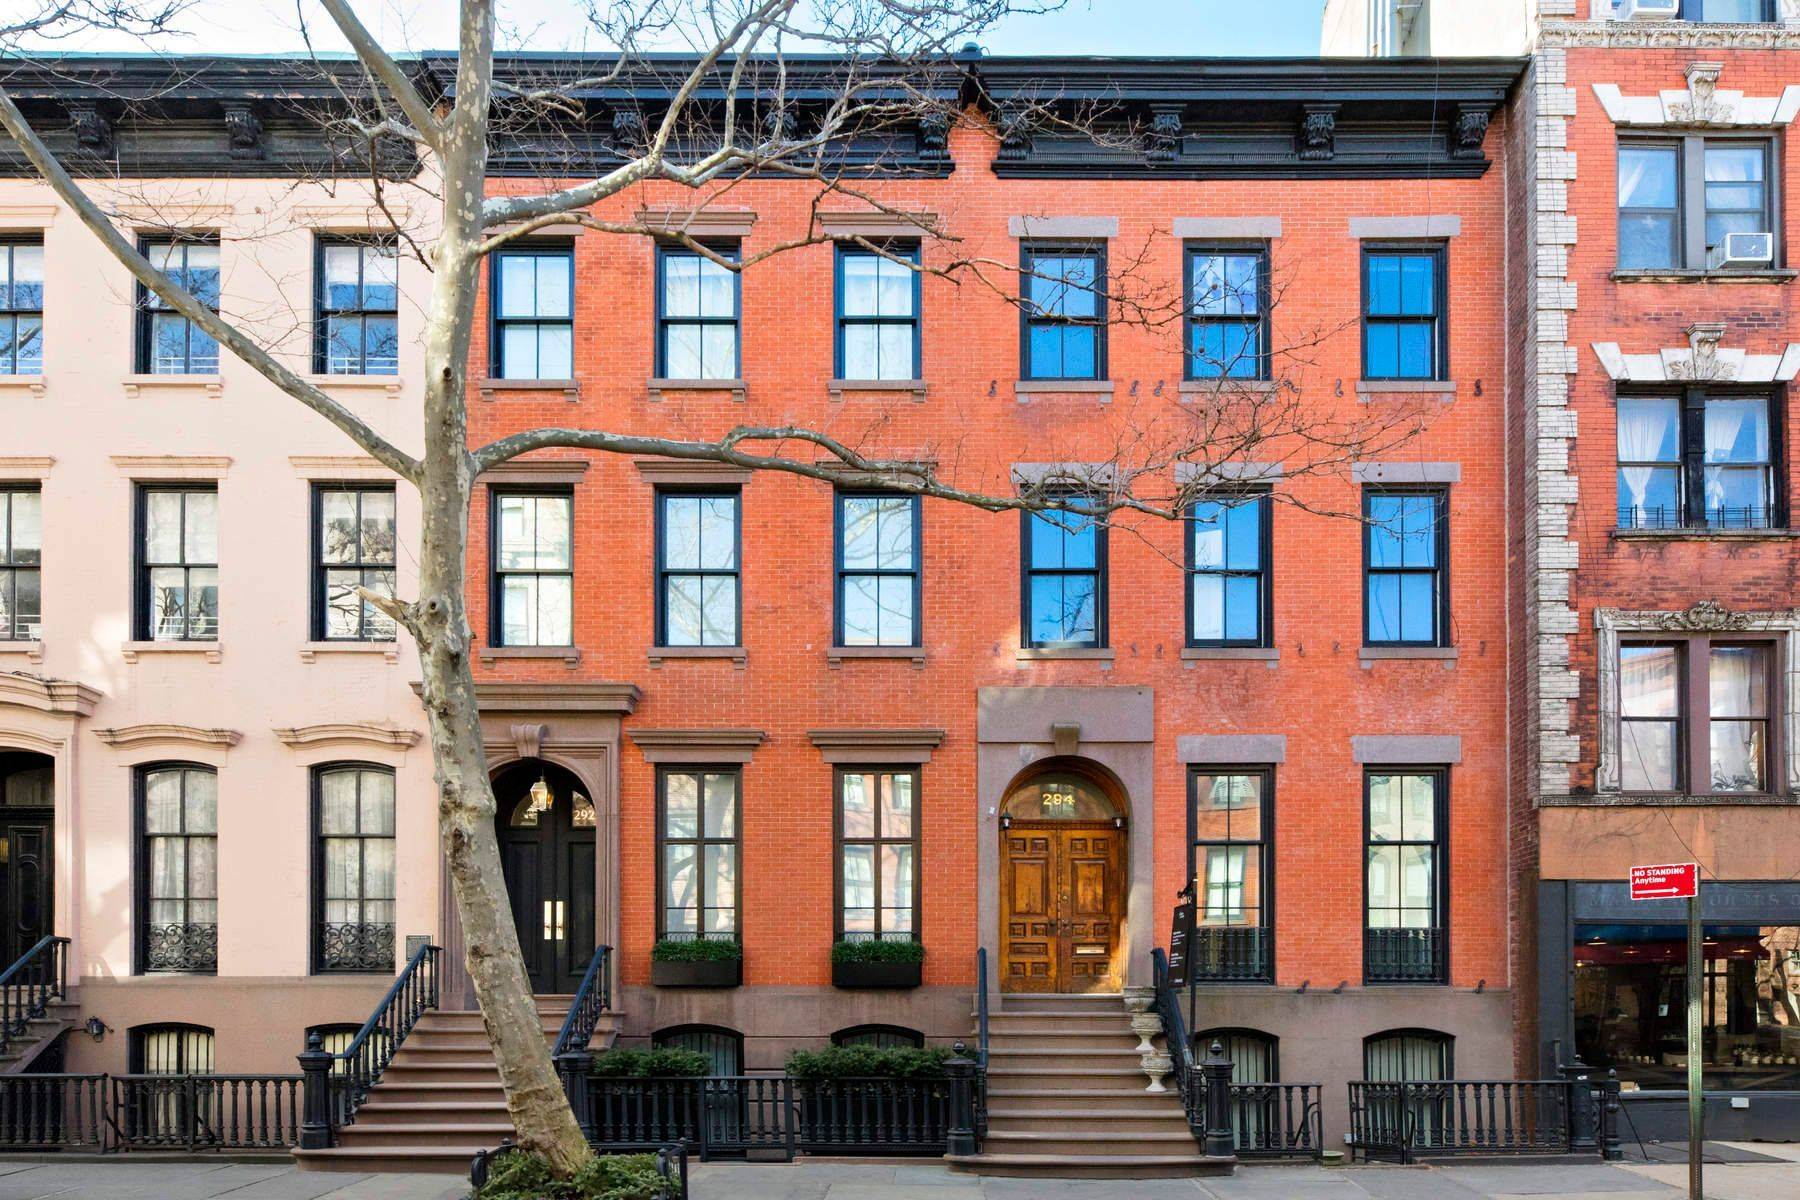 Incredibly rare opportunity to create a magnificent single family mansion on one of West Village's most desirable residential townhouse blocks.